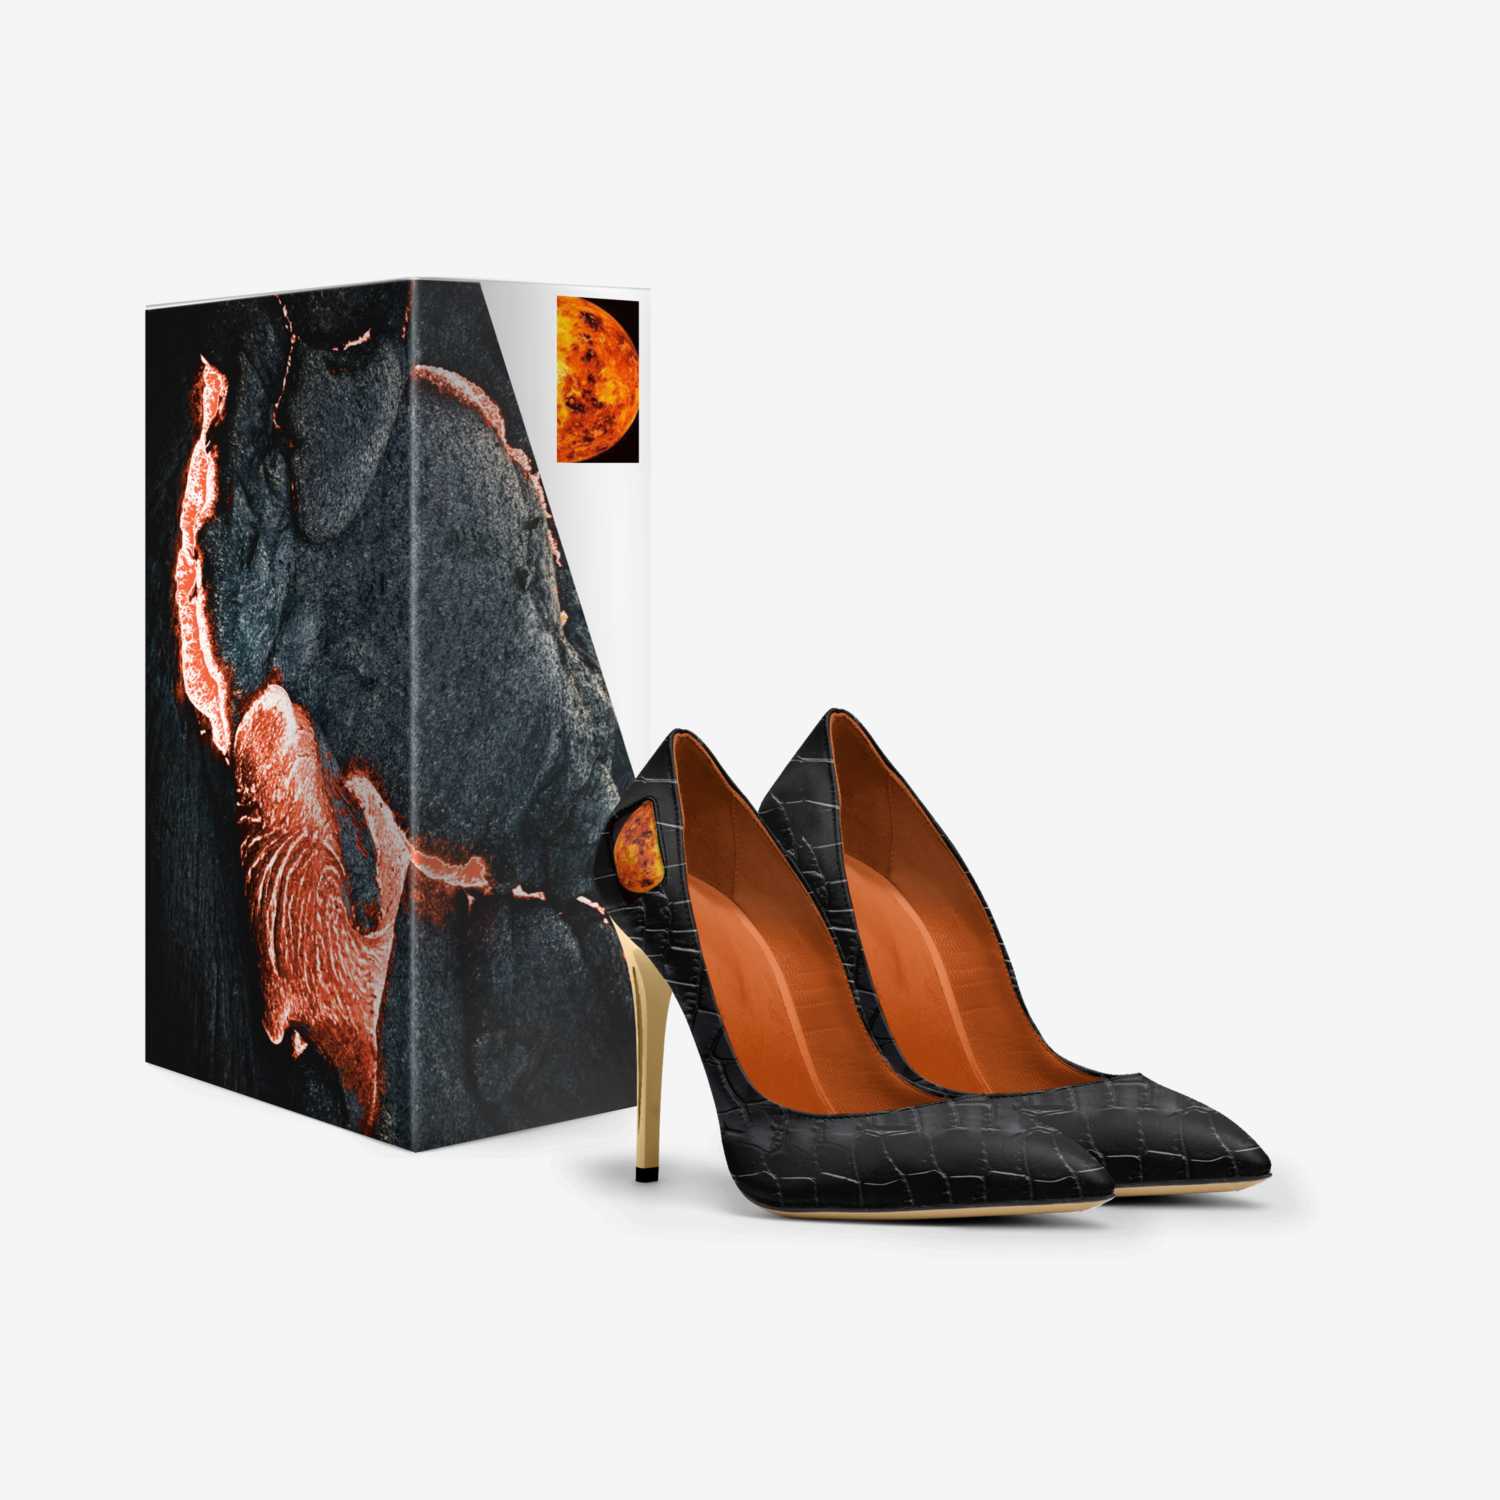 Mercury for Her custom made in Italy shoes by Cedric Harris | Box view